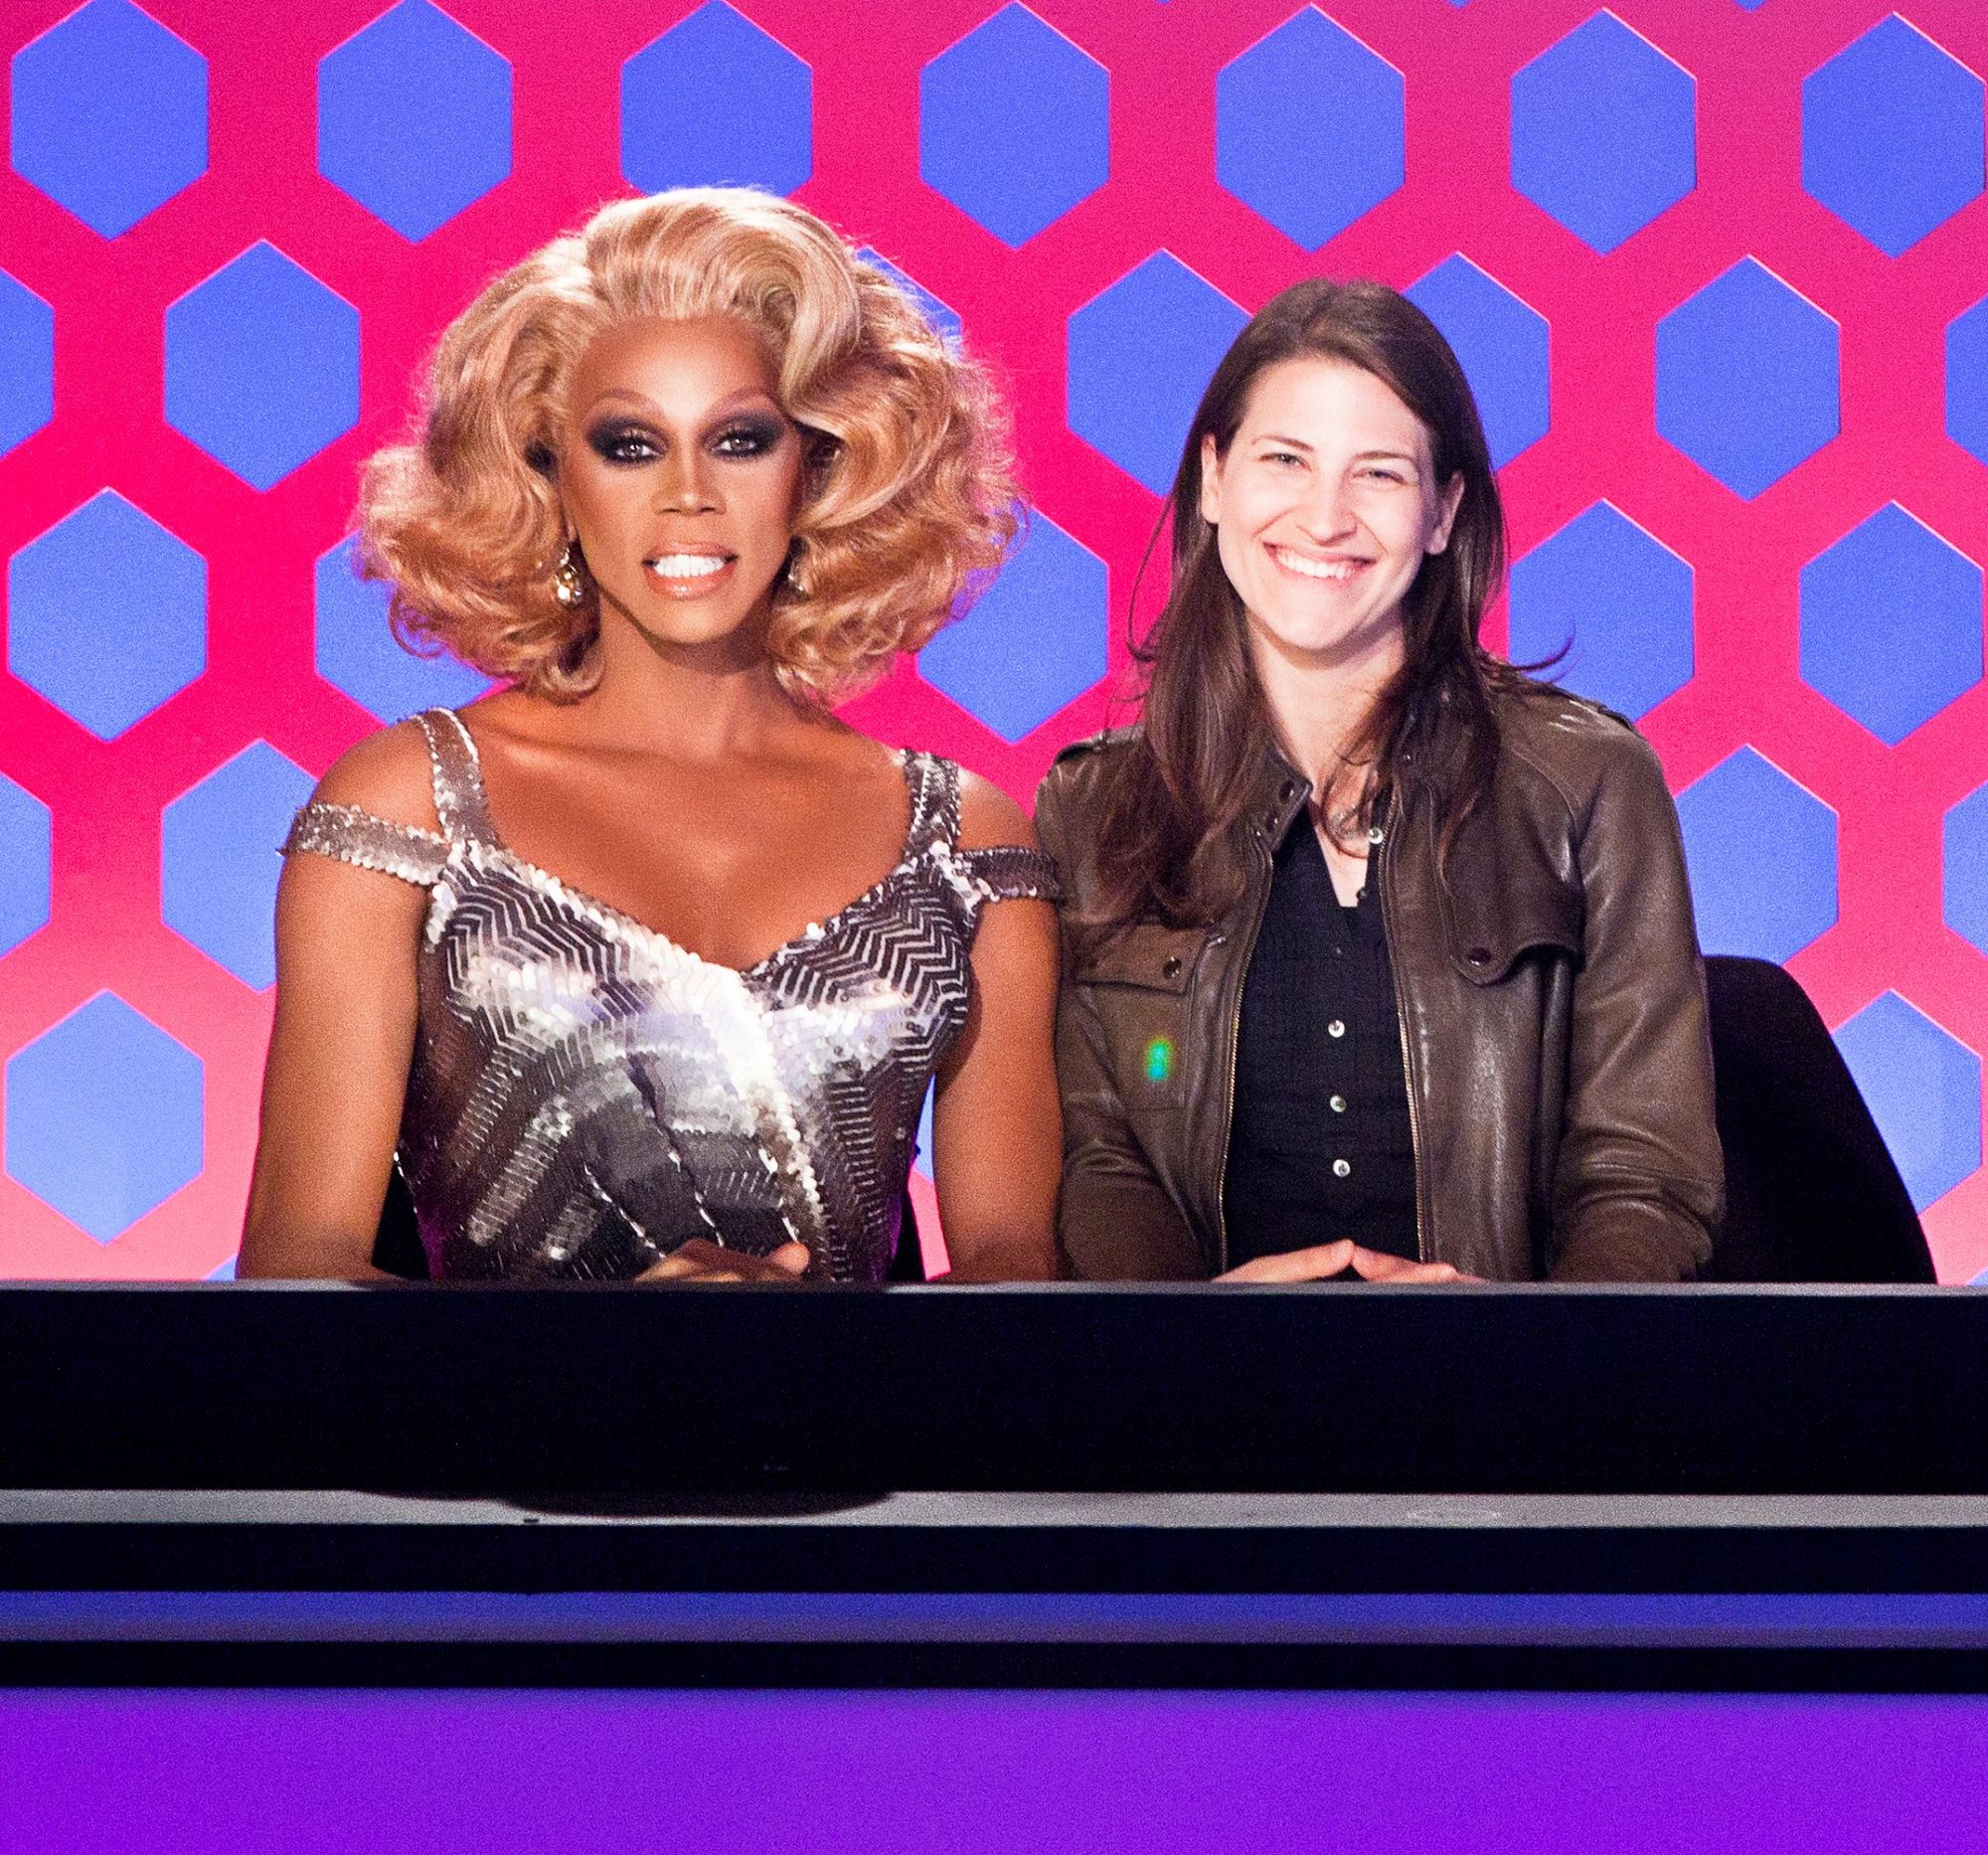 A photograph of drag queen RuPaul, in blond wig and a silver, sparkling dress with two straps on each shoulder, next to the author, who presents as female in long brown hair and a leather jacket over a fitted black shirt with buttons. They are sitting shoulder to shoulder behind a black counter on top of a purple base, the judges’ panel on RuPaul’s Drag Race; behind them is a wall with magenta hexagons on a blue background.